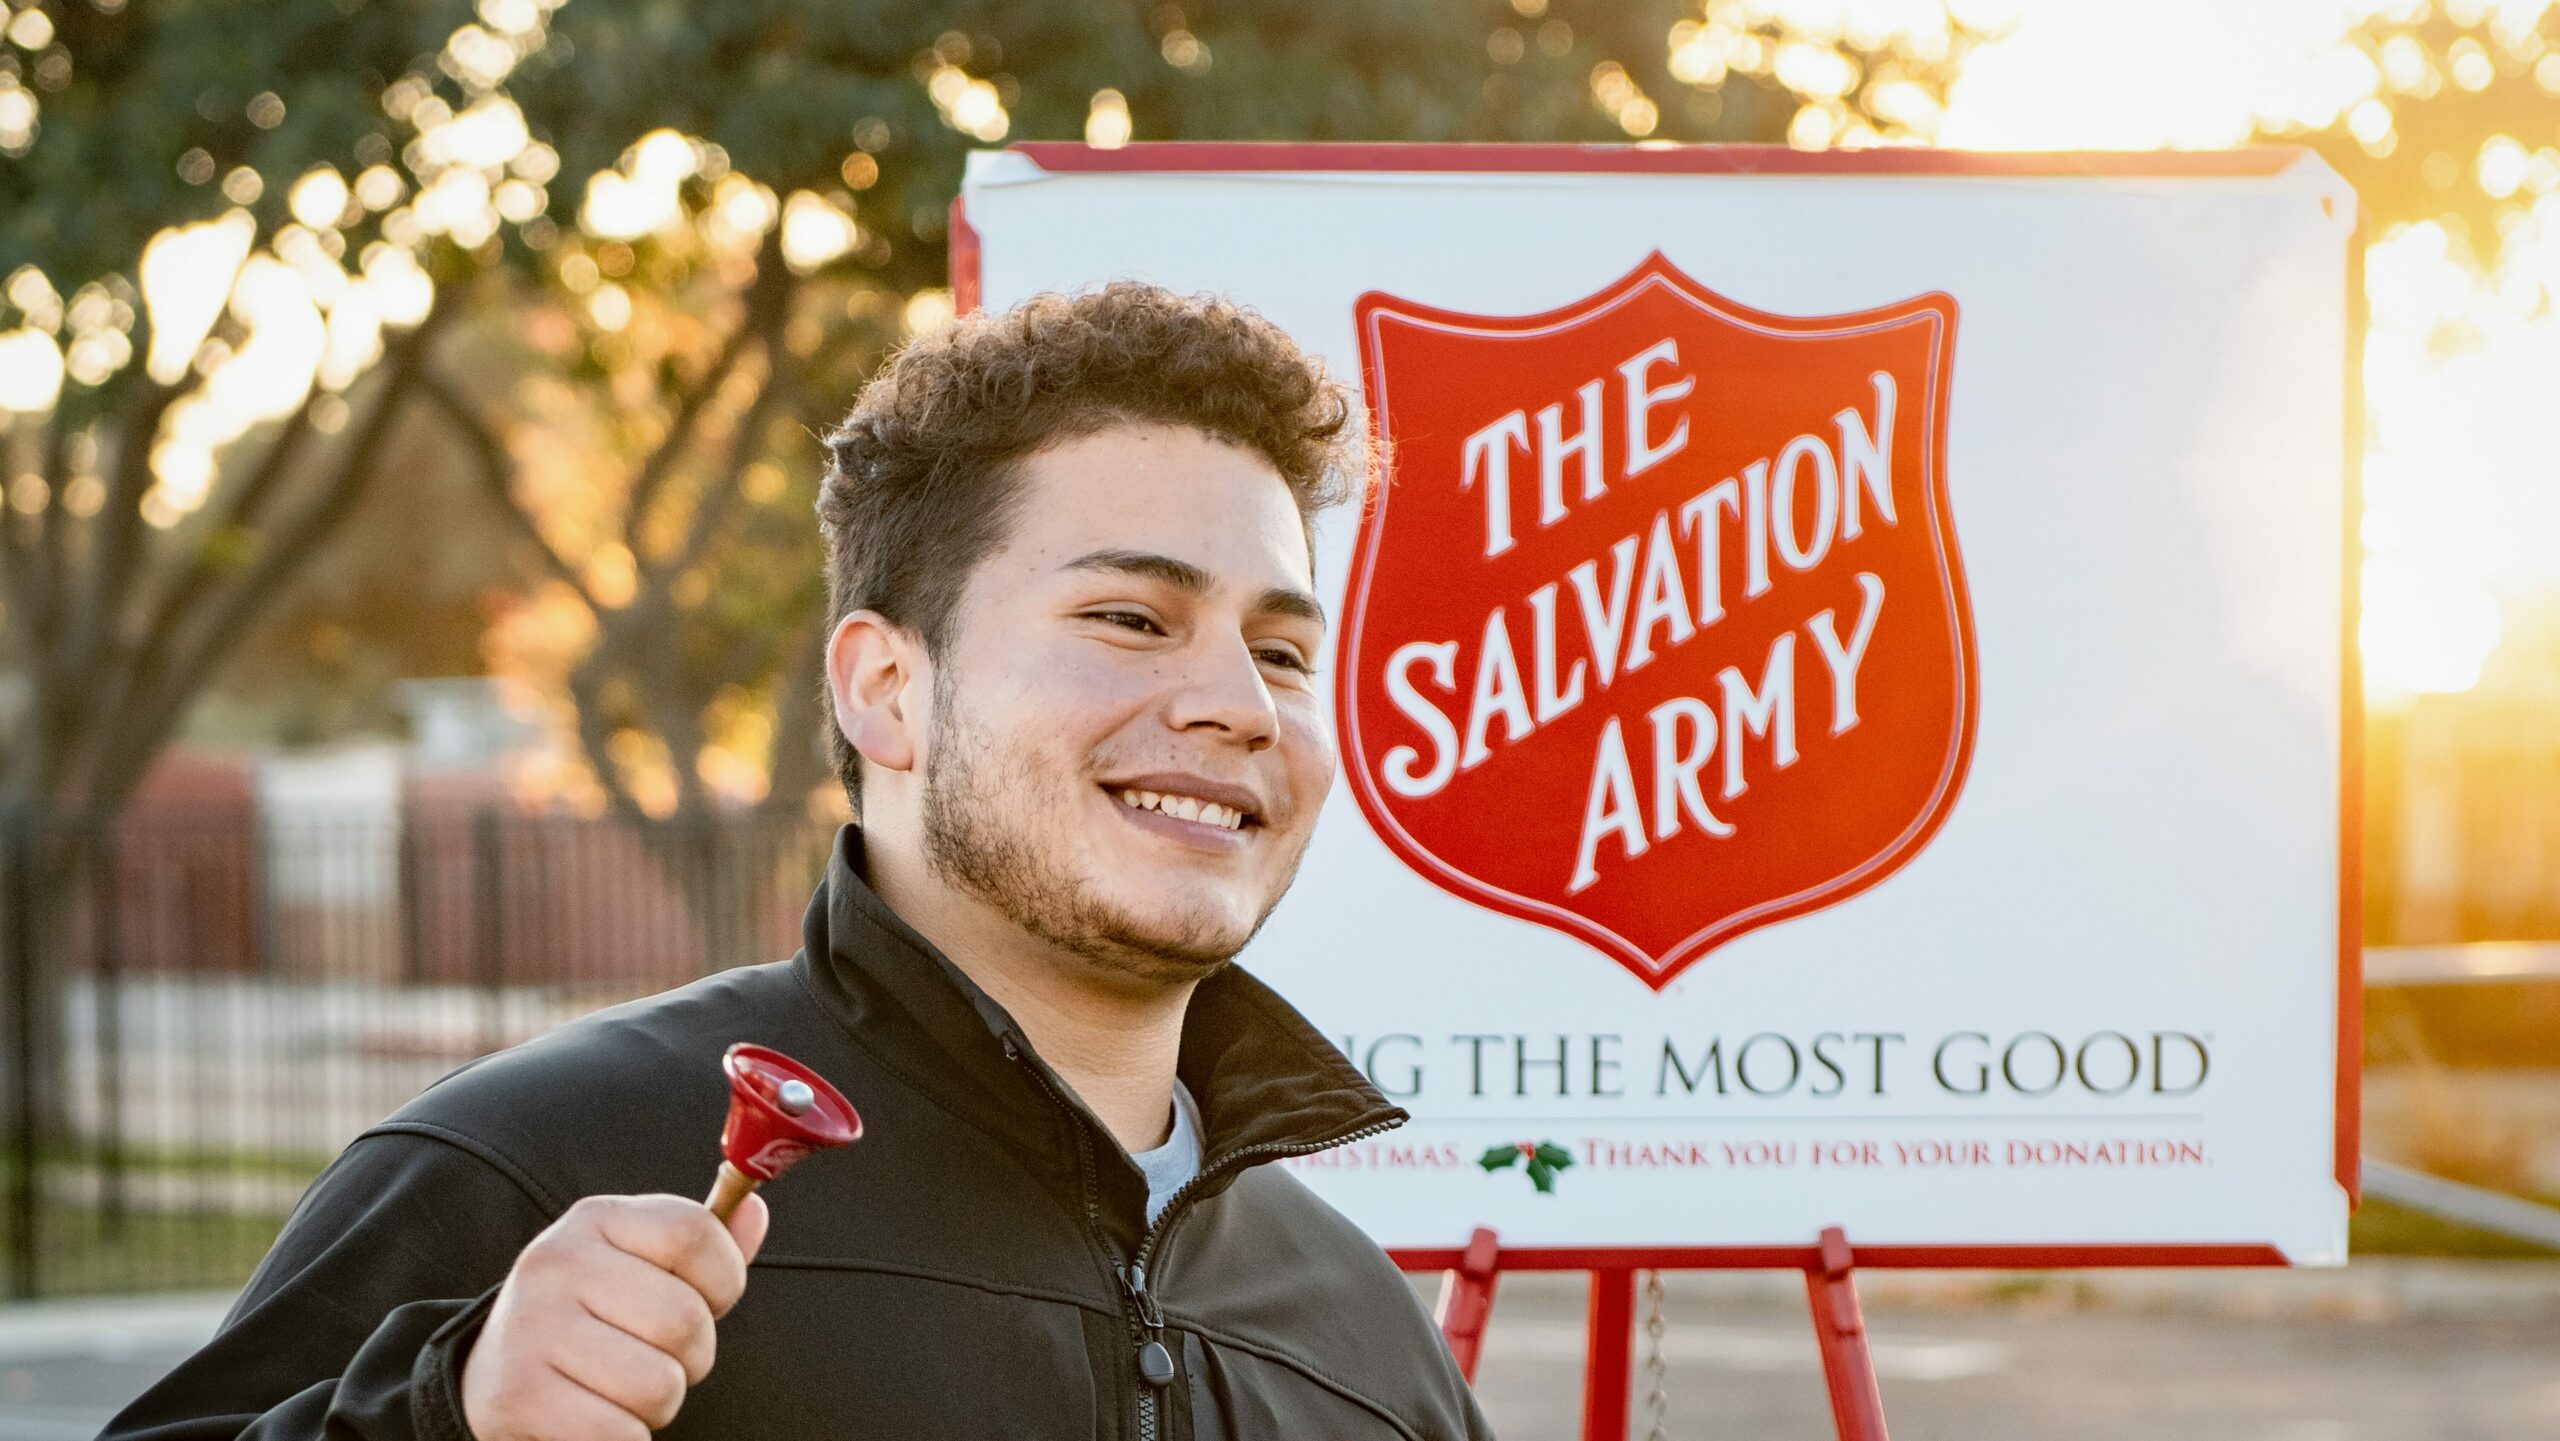 What Time Does Salvation Army Close Open?